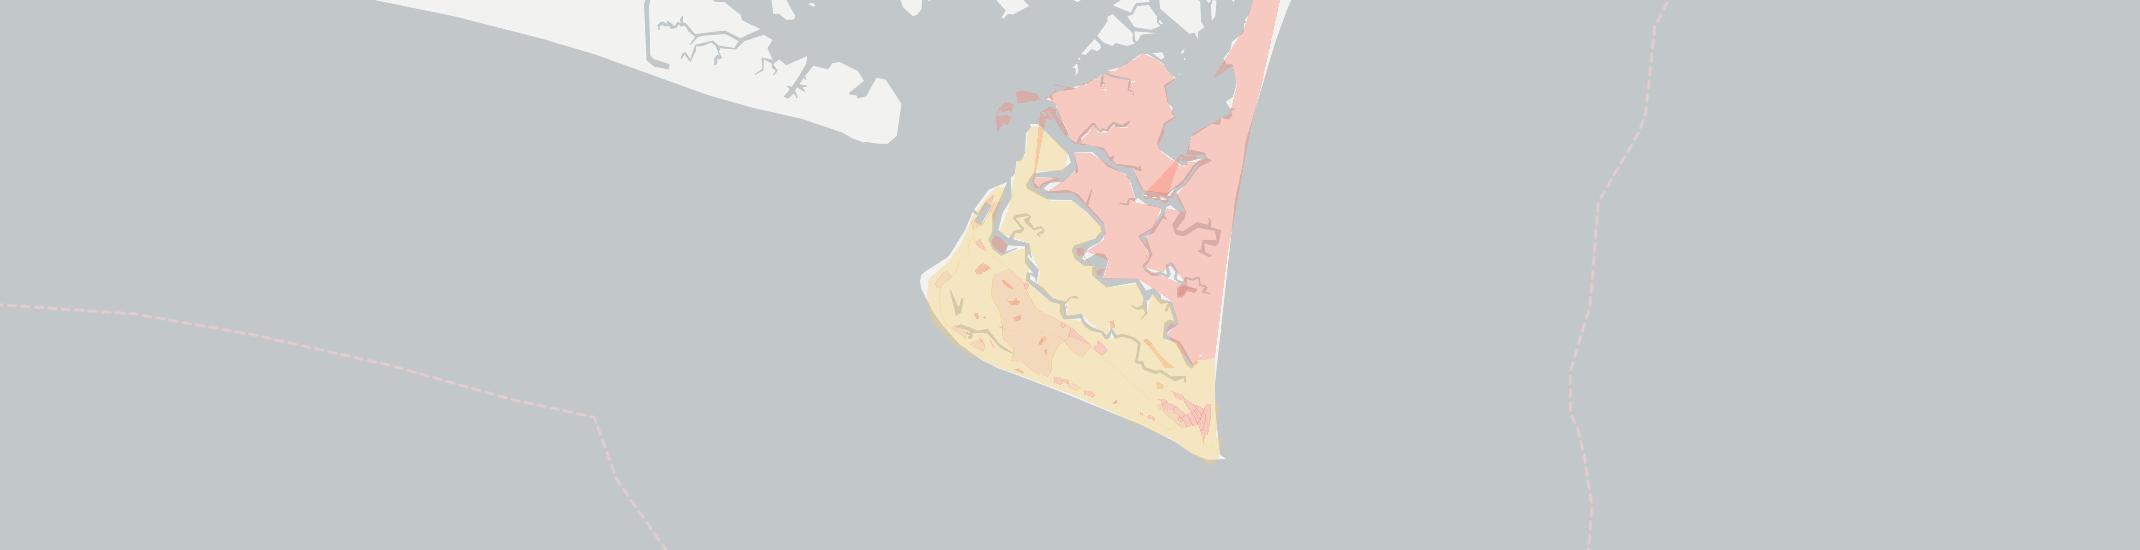 Bald Head Island Internet Competition Map. Click for interactive map